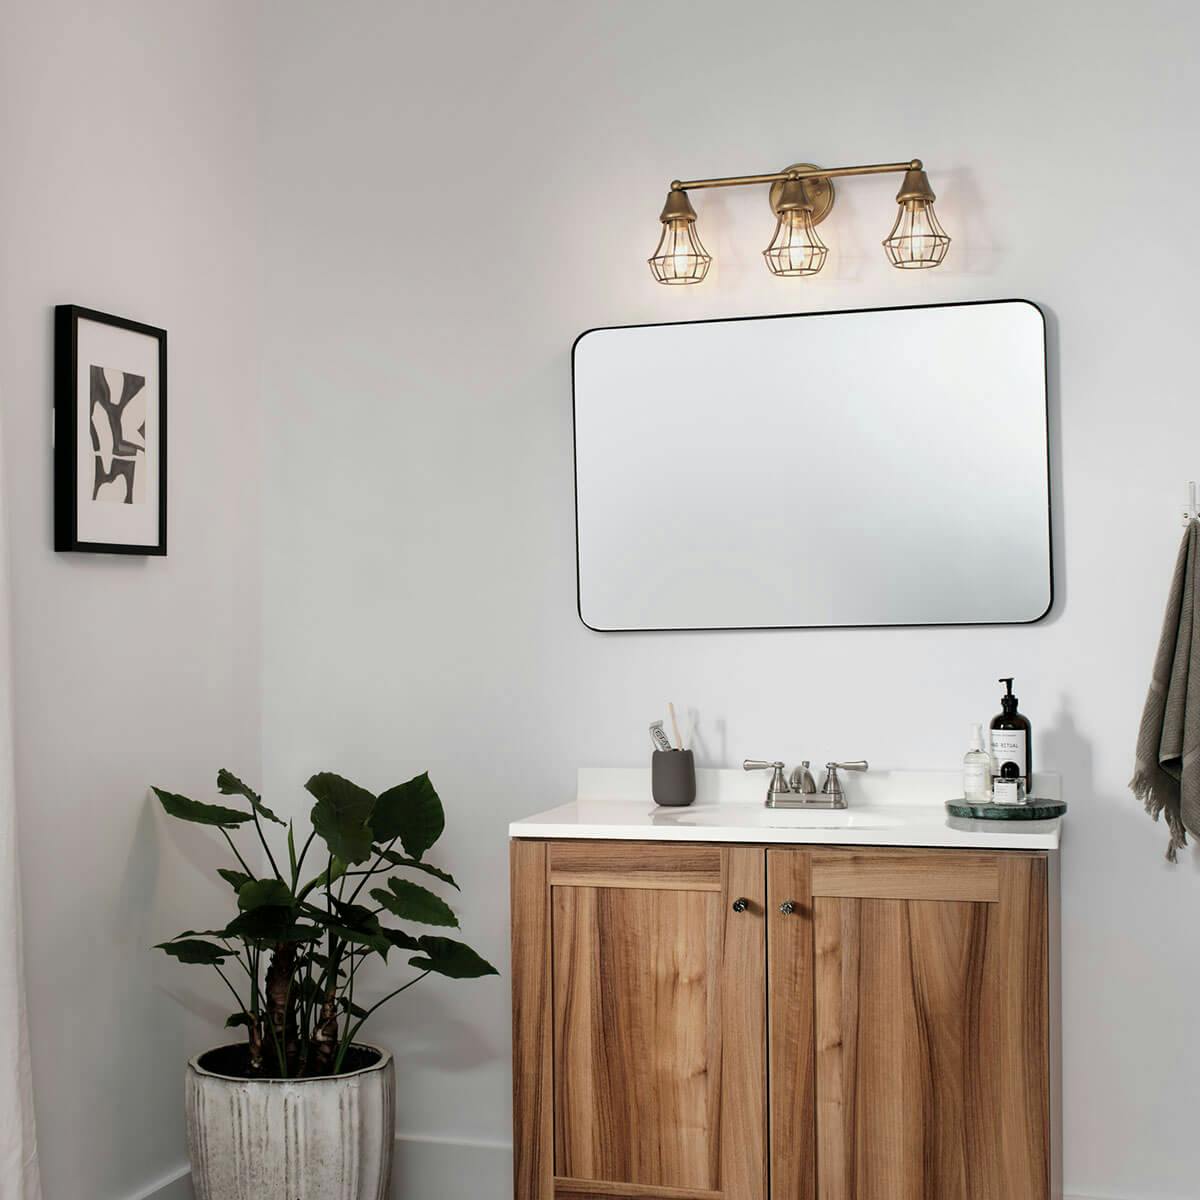 Day time Bathroom featuring Bayley vanity light 37509NBR